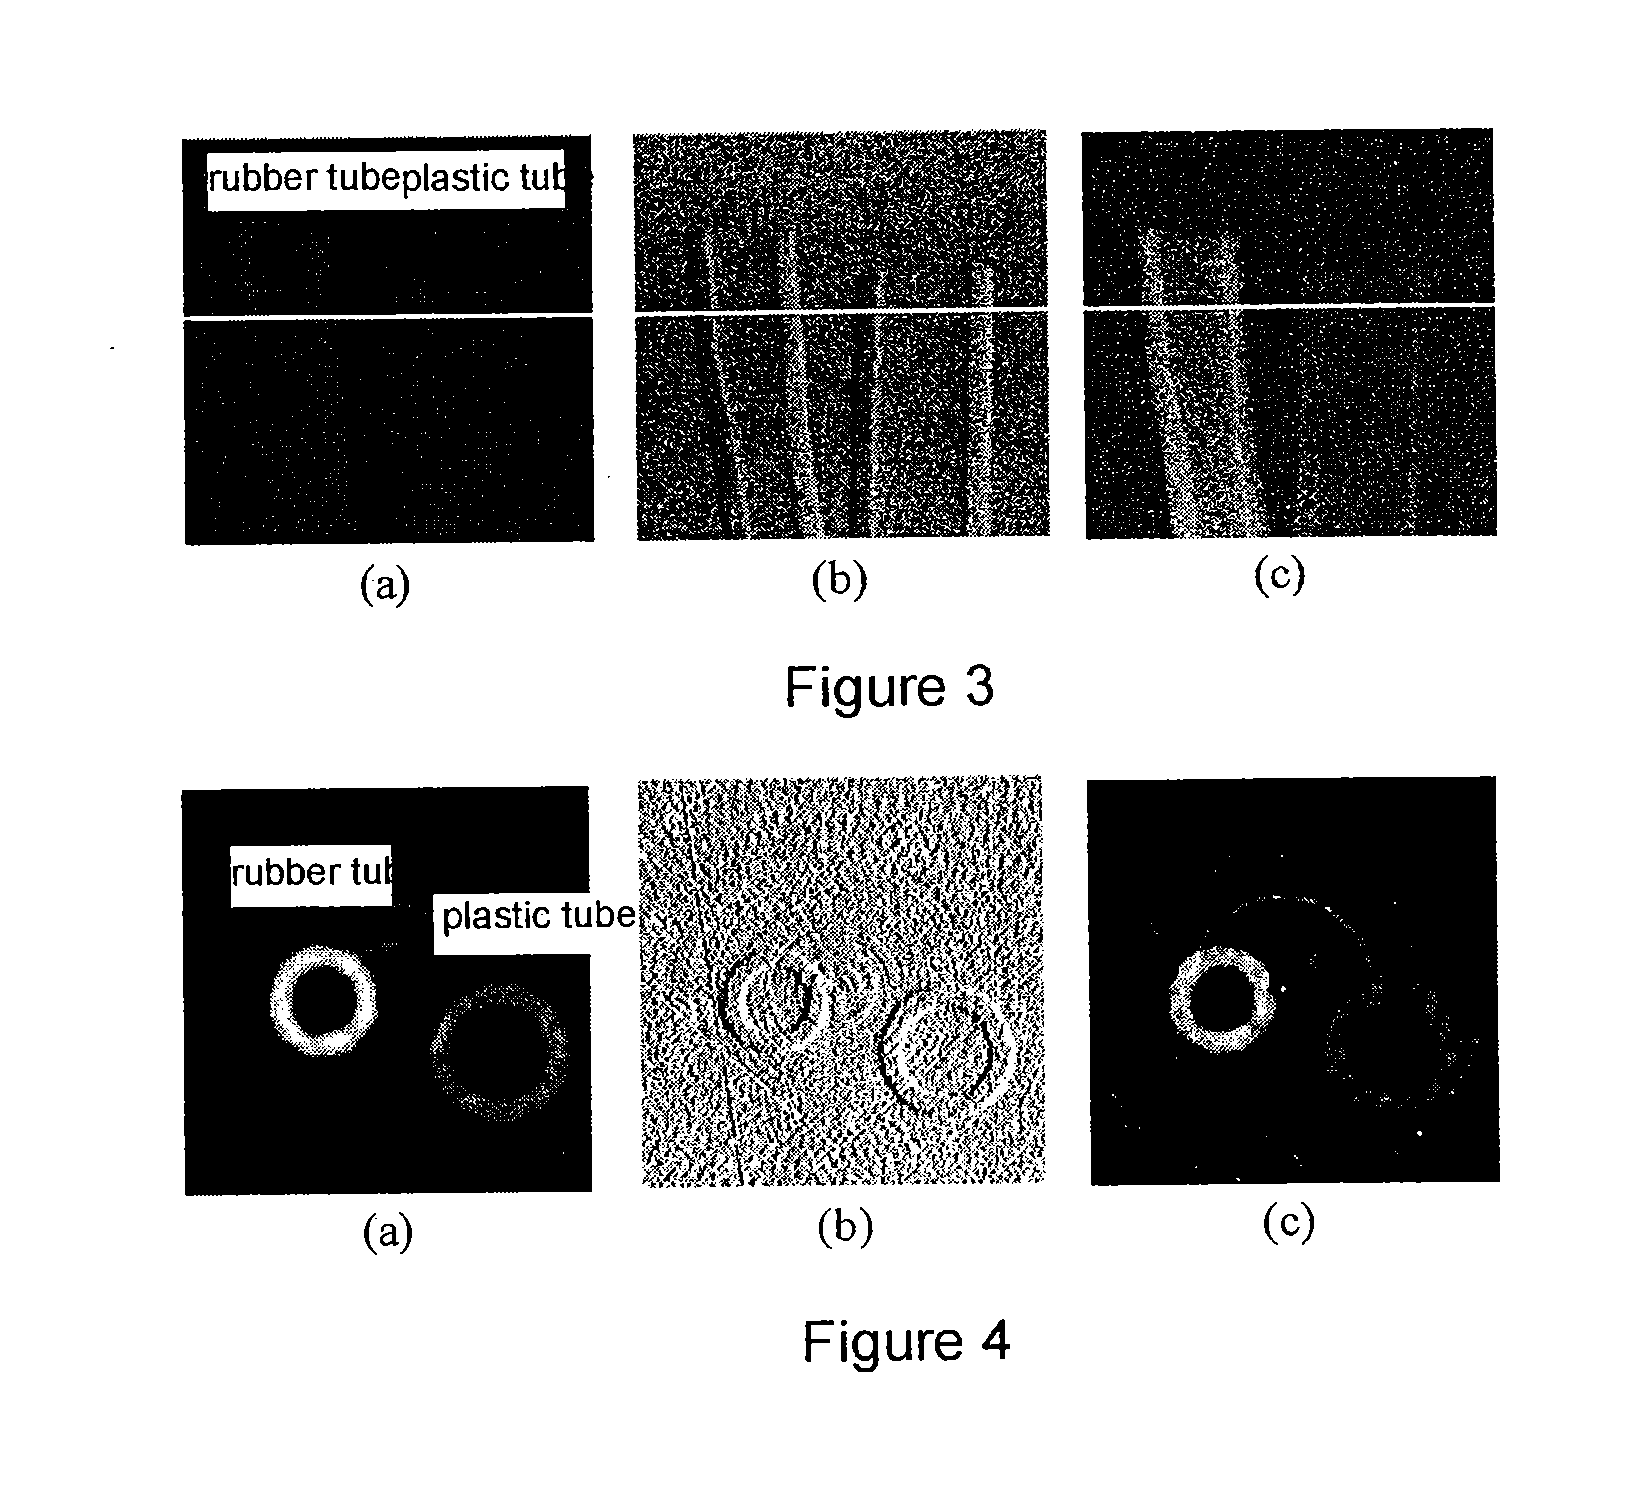 X-ray dark-field imaging system and method